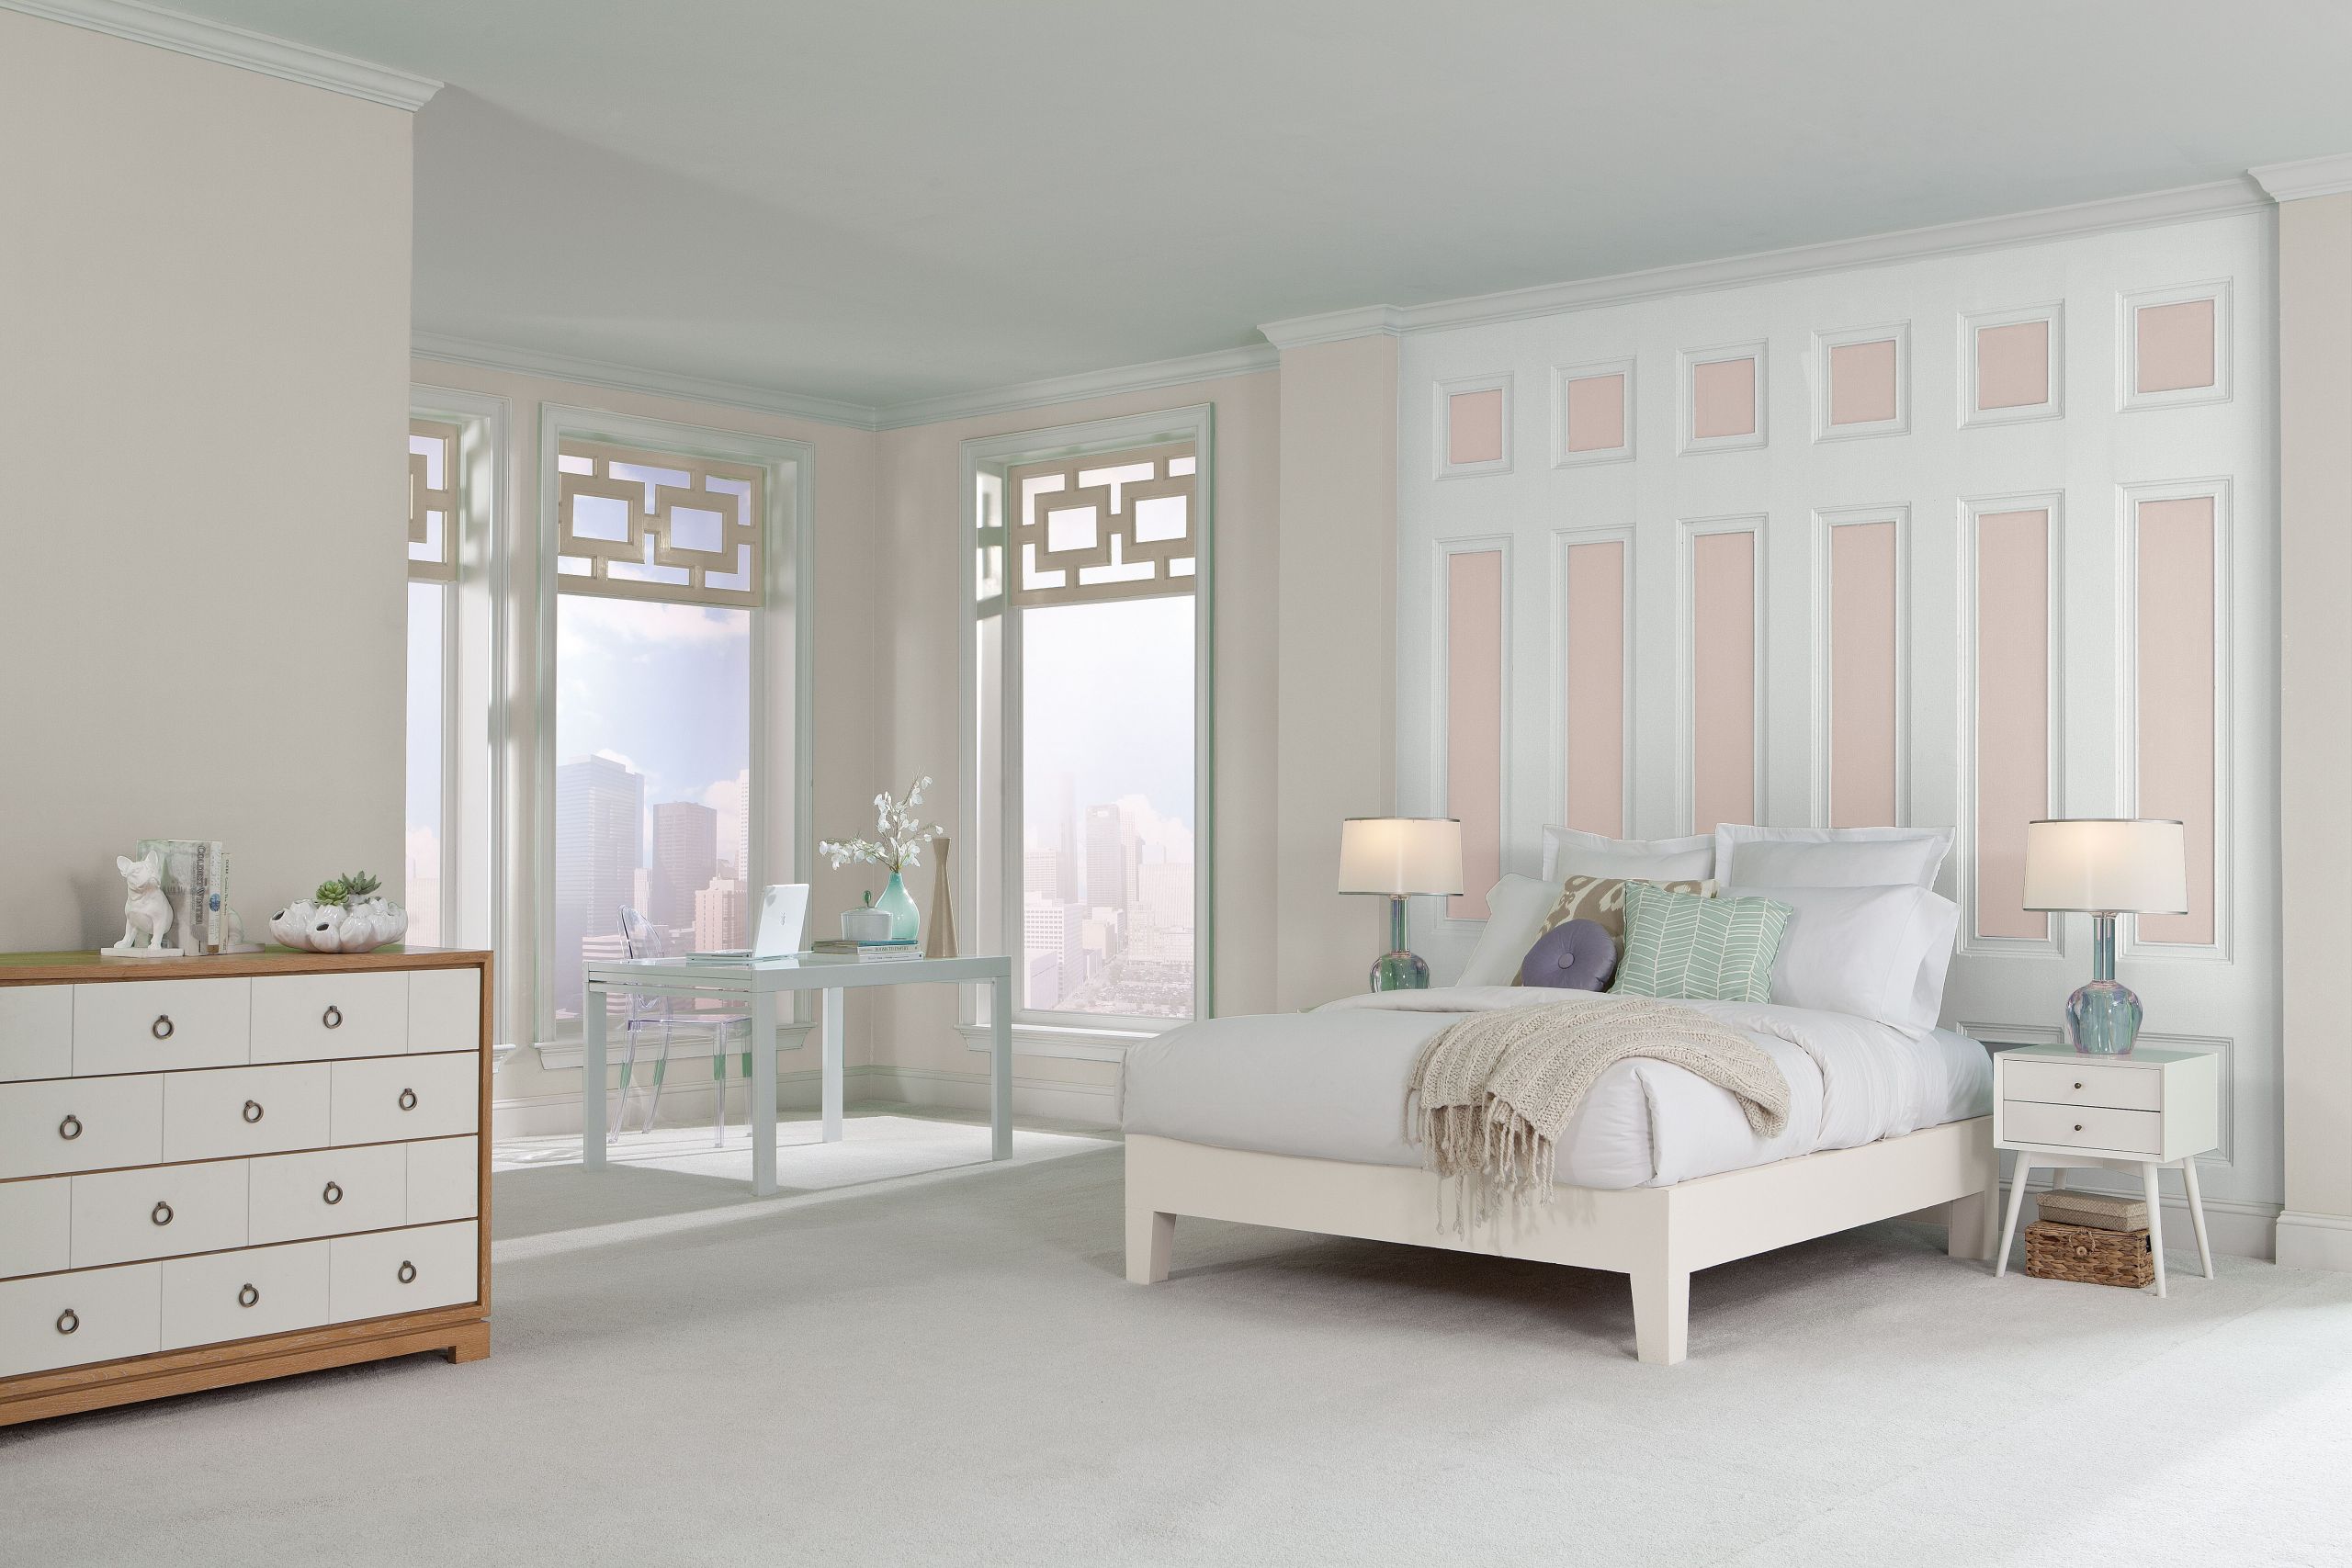 Girls Bedroom Colors
 10 Beautiful Colors for a Little Girl s Room